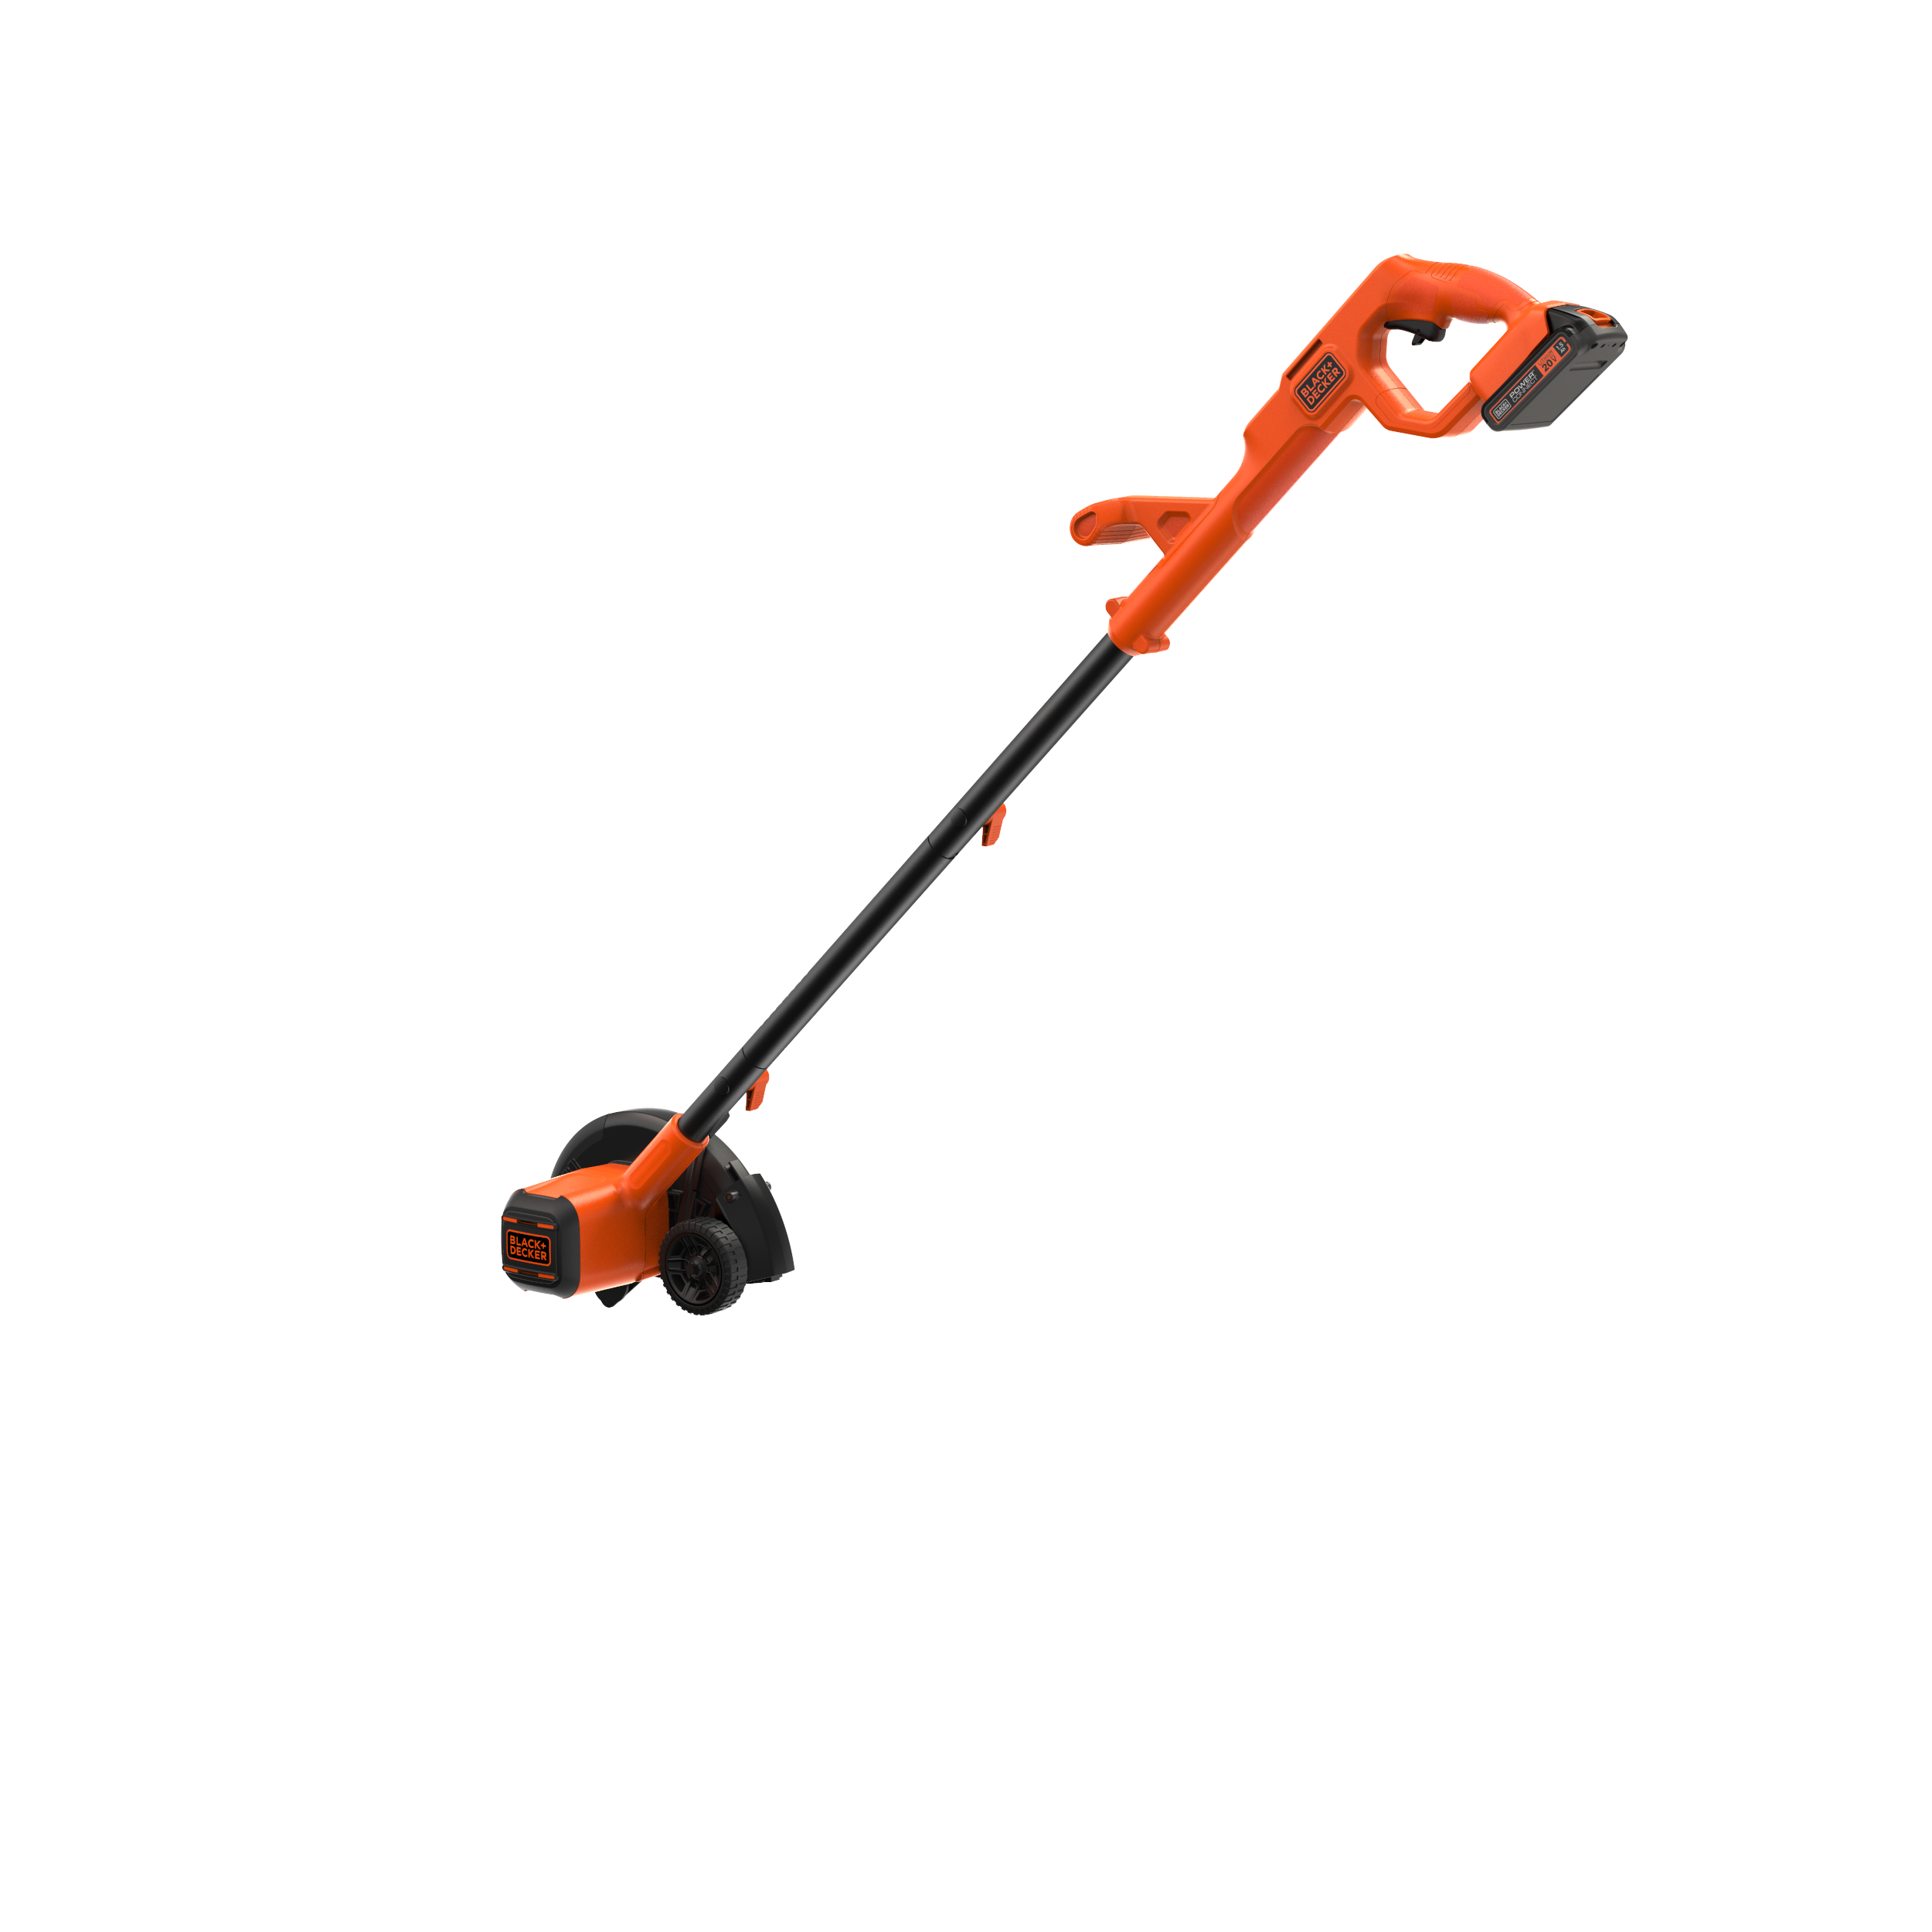 Black & Decker LE750 7.5 in. 12-Amp Corded Electric 2-in-1 Landscape Edger/Trencher  